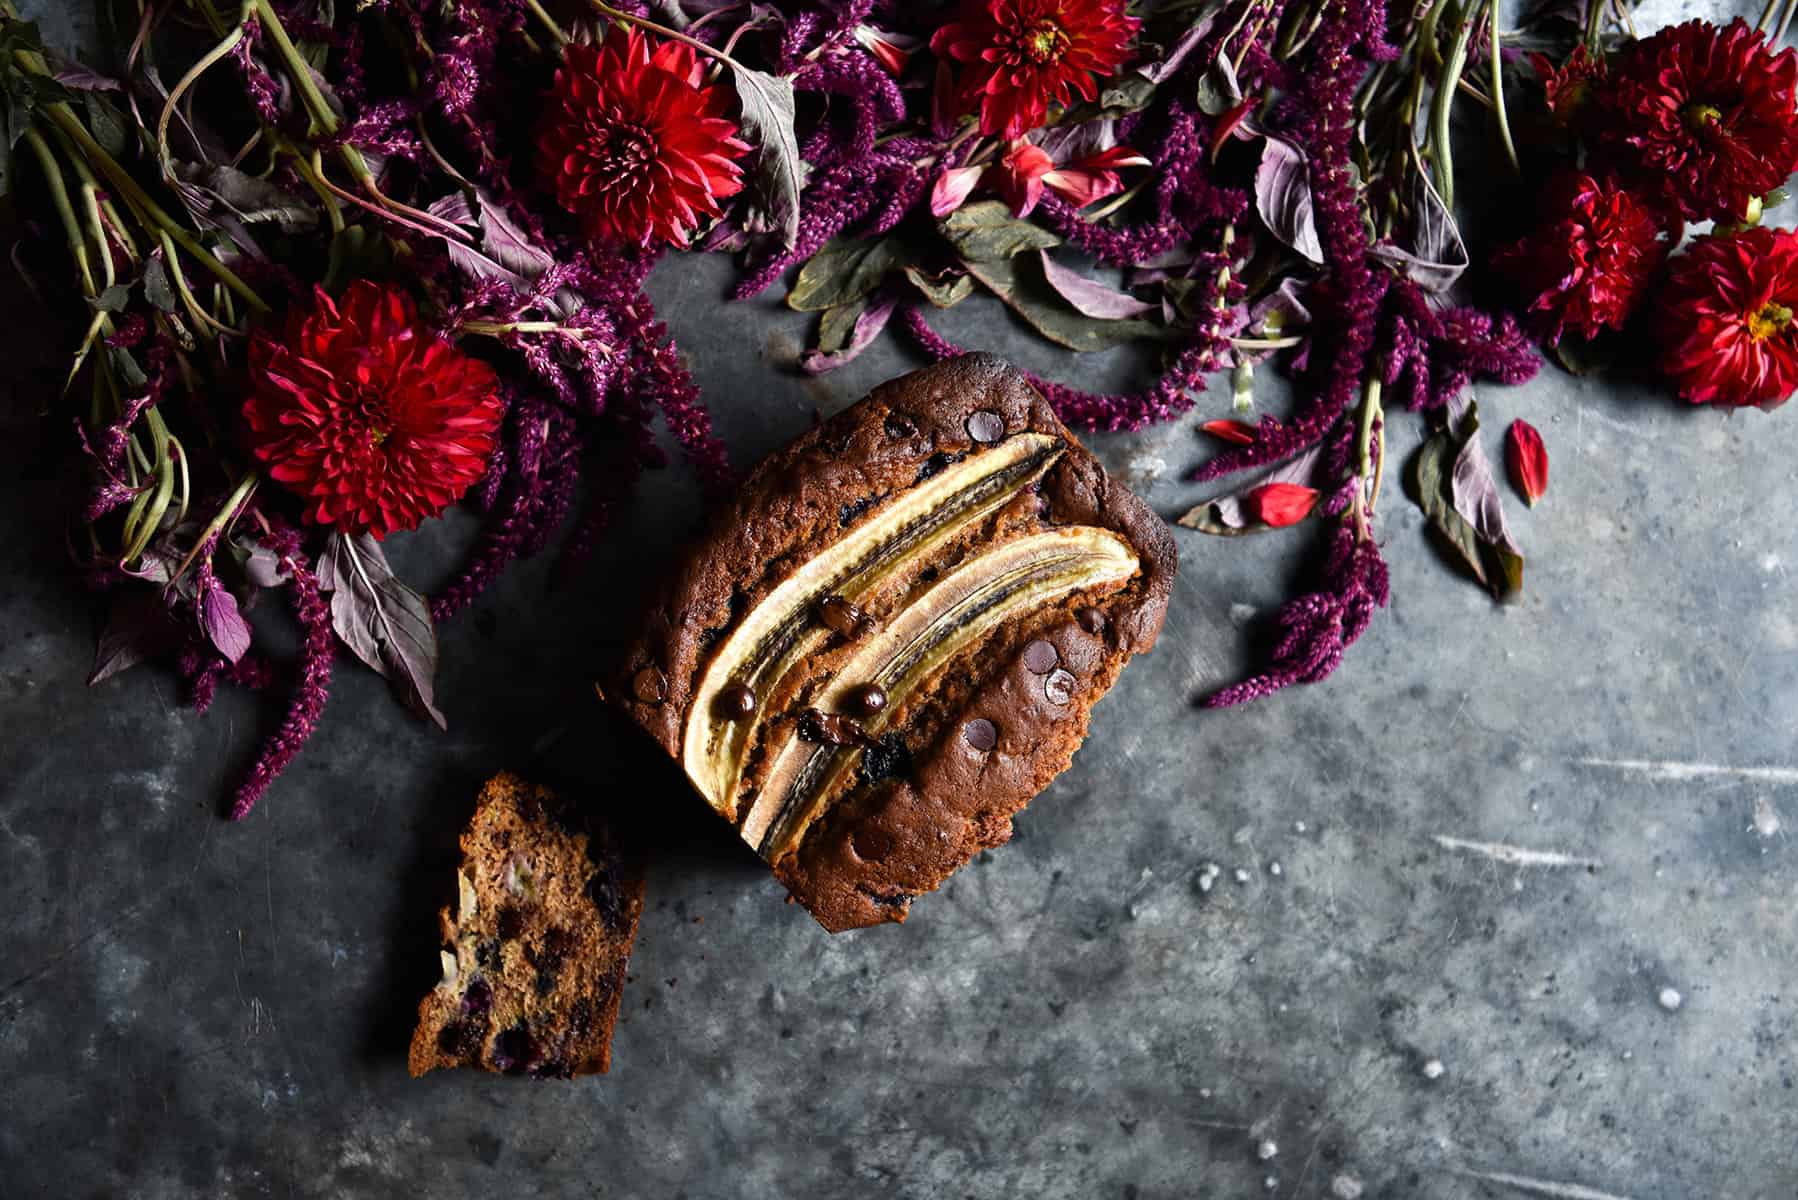 An aerial image of a loaf of gluten free banana bread on a dark blue steel backdrop surrounded by red and purple flowers.